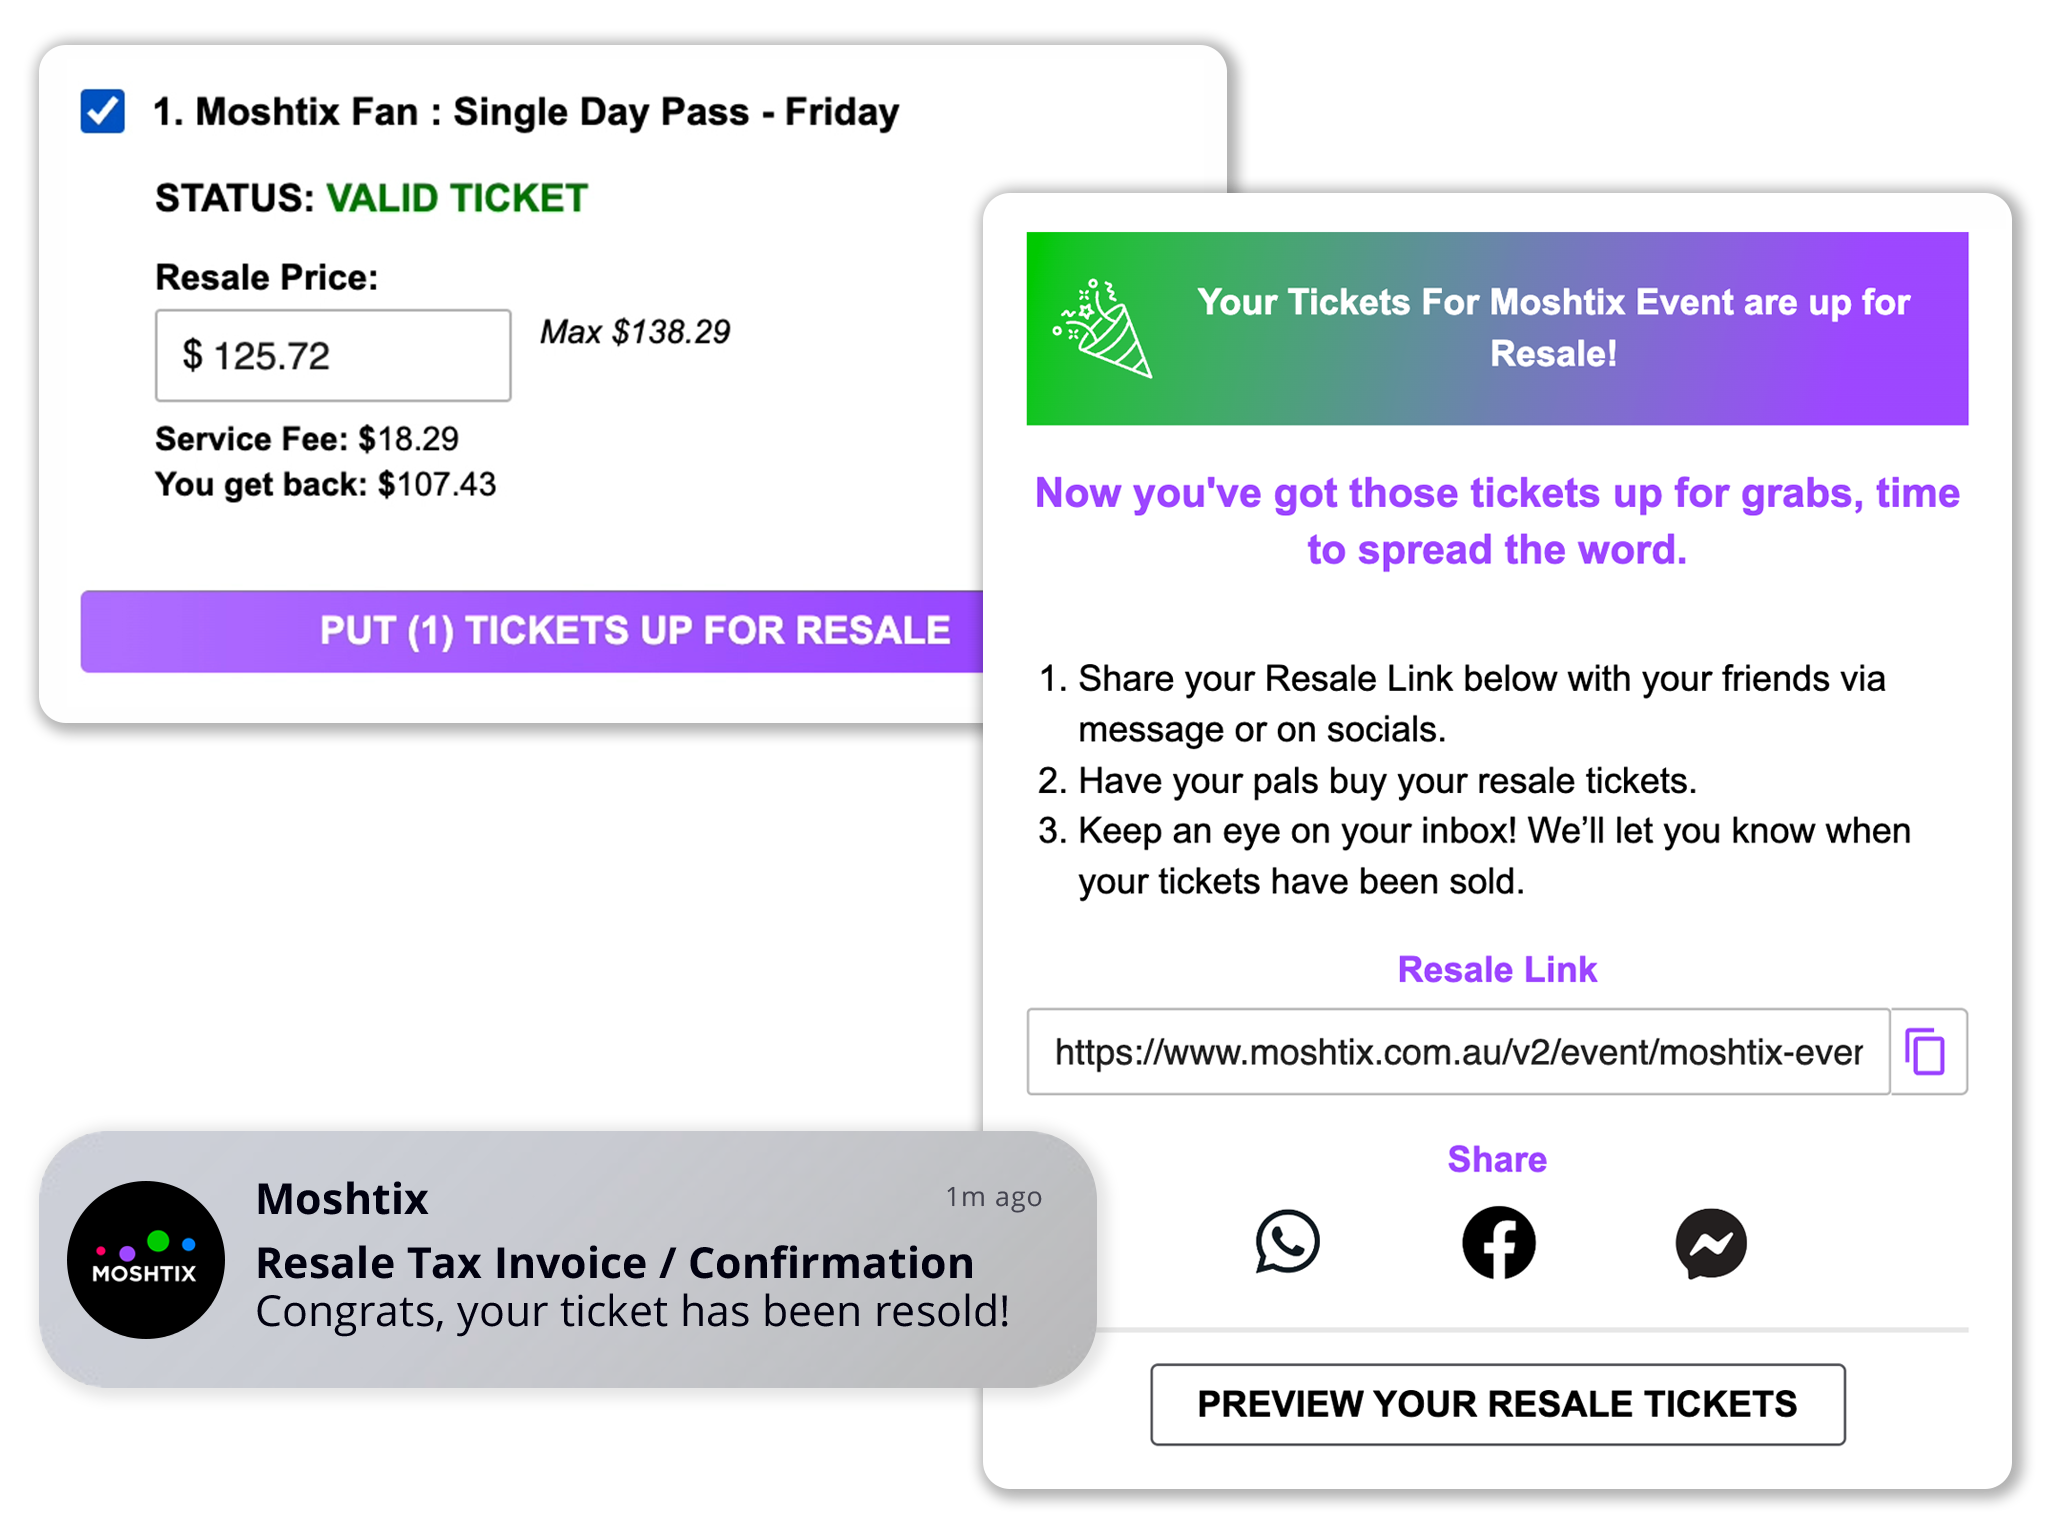 An image showing that a ticket has been listed for resale